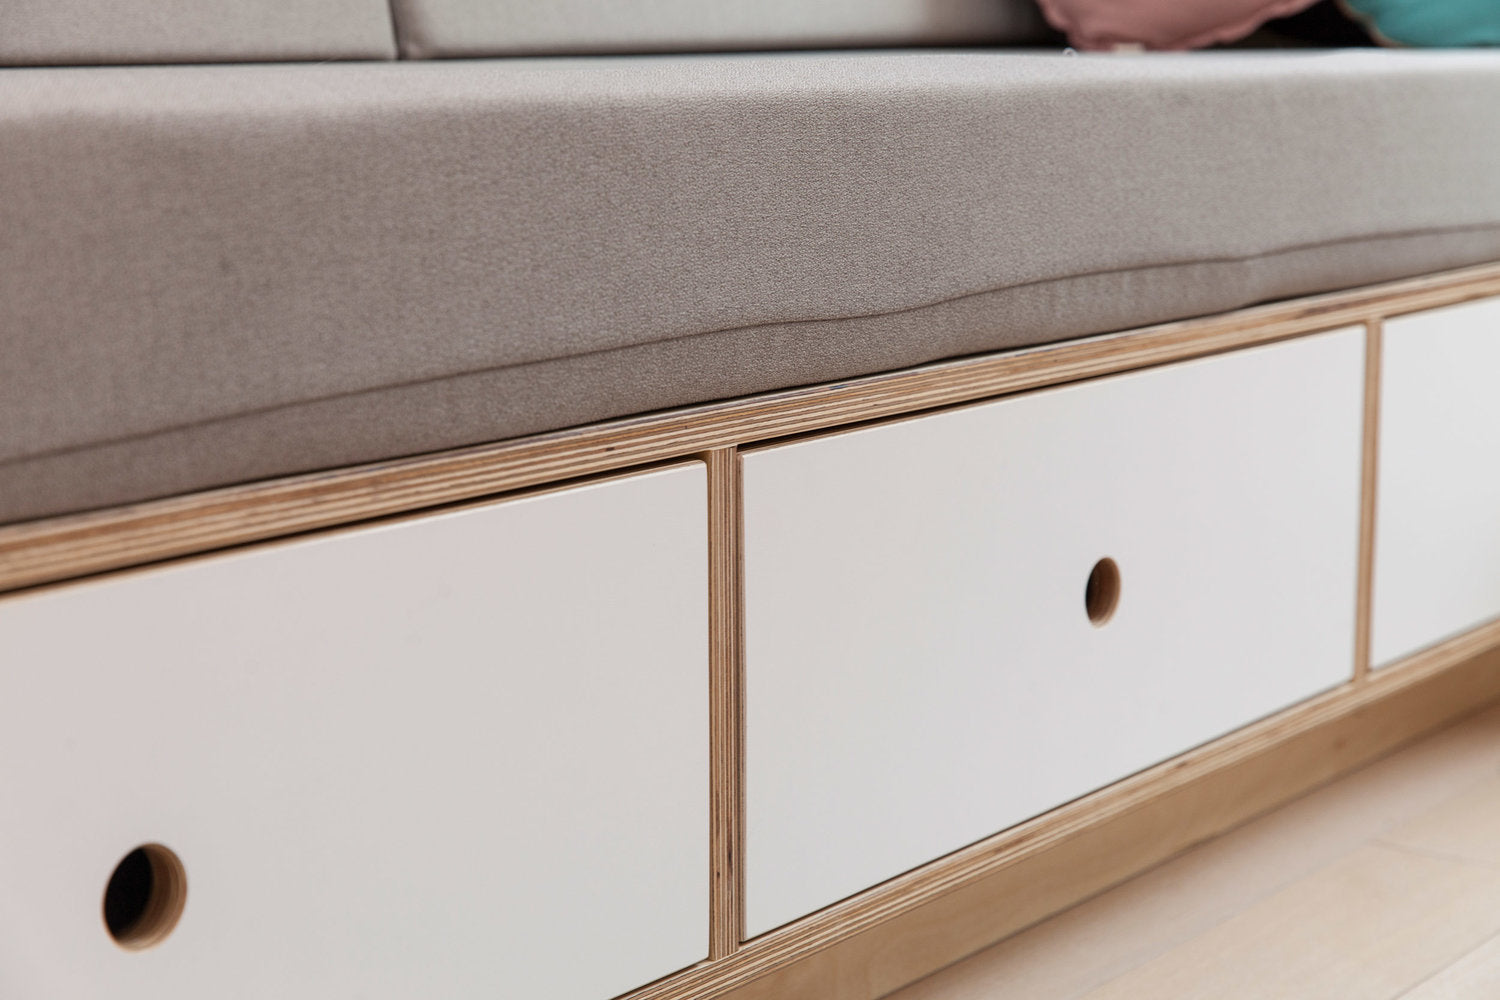 Close-up of a modern sofa with built-in white drawers.